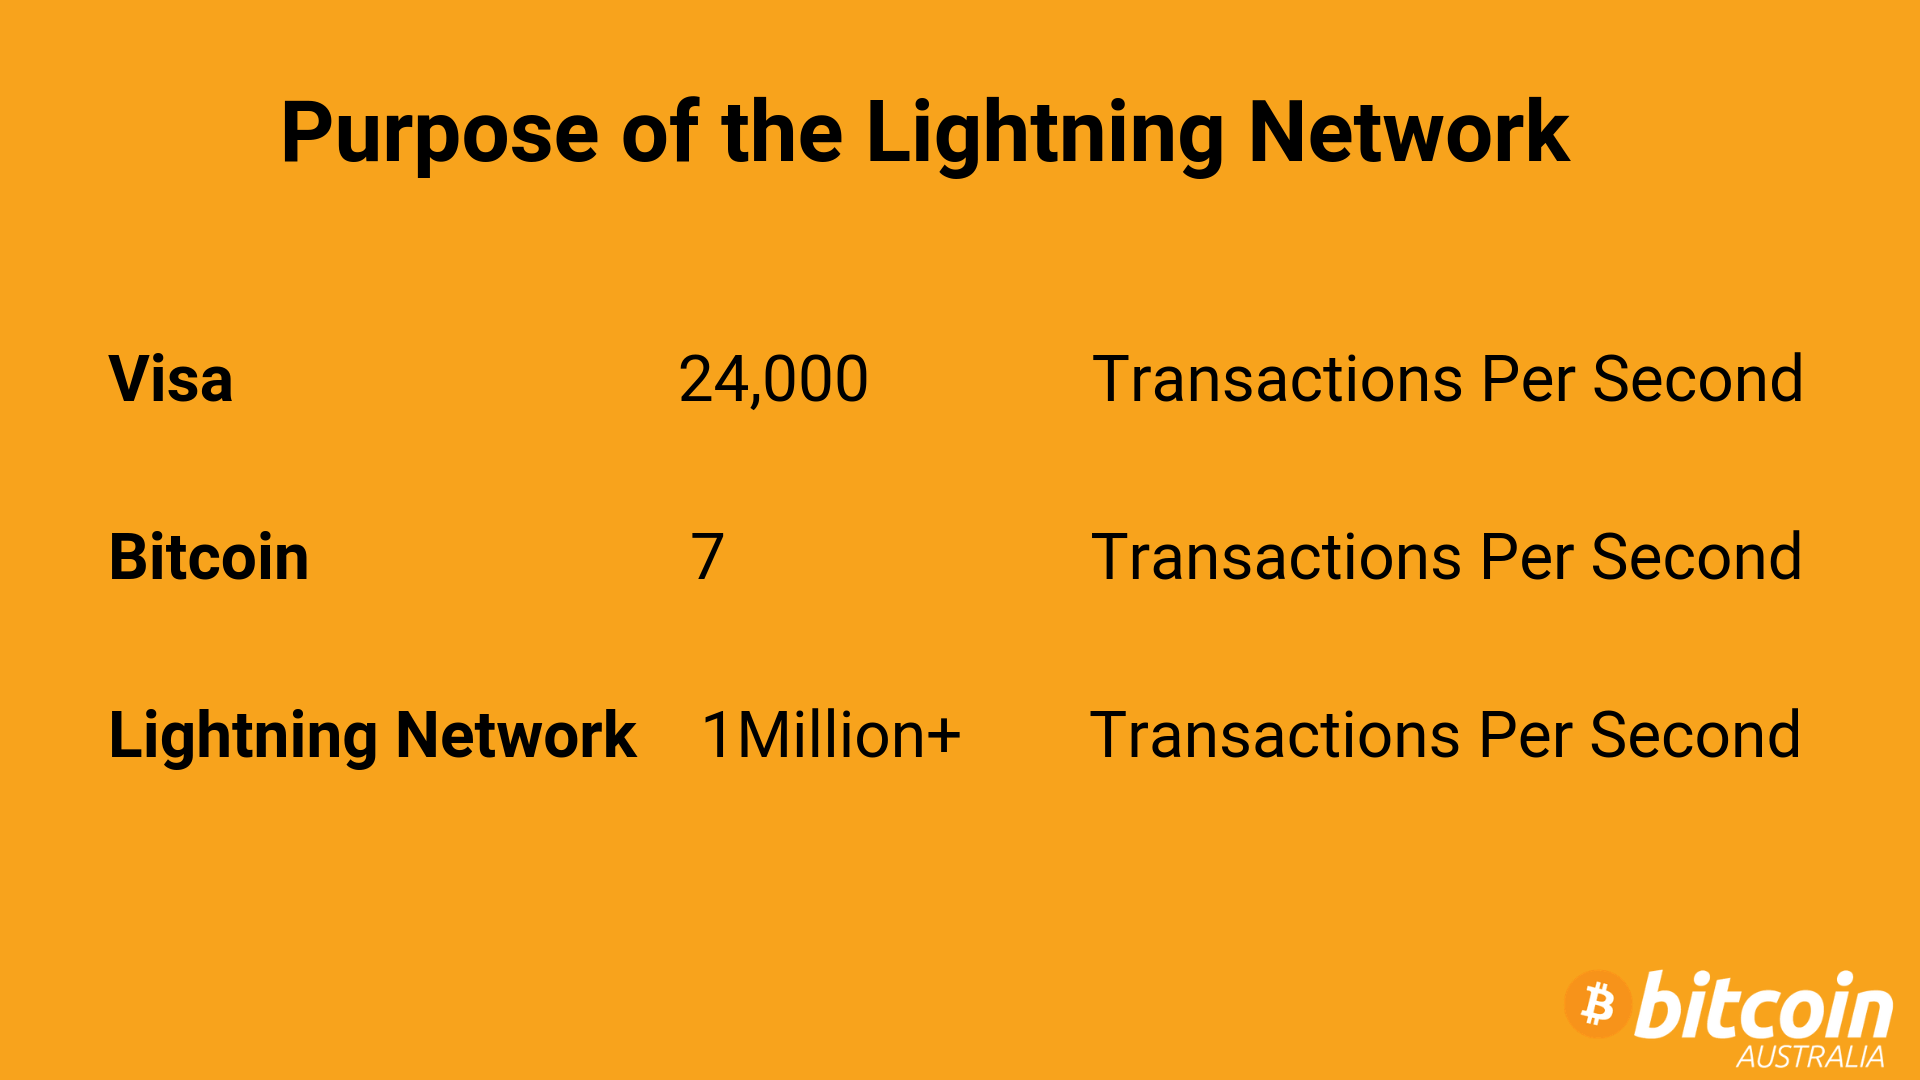 Image showing transactions per second of Visa, Bitcoin and Lightning Network